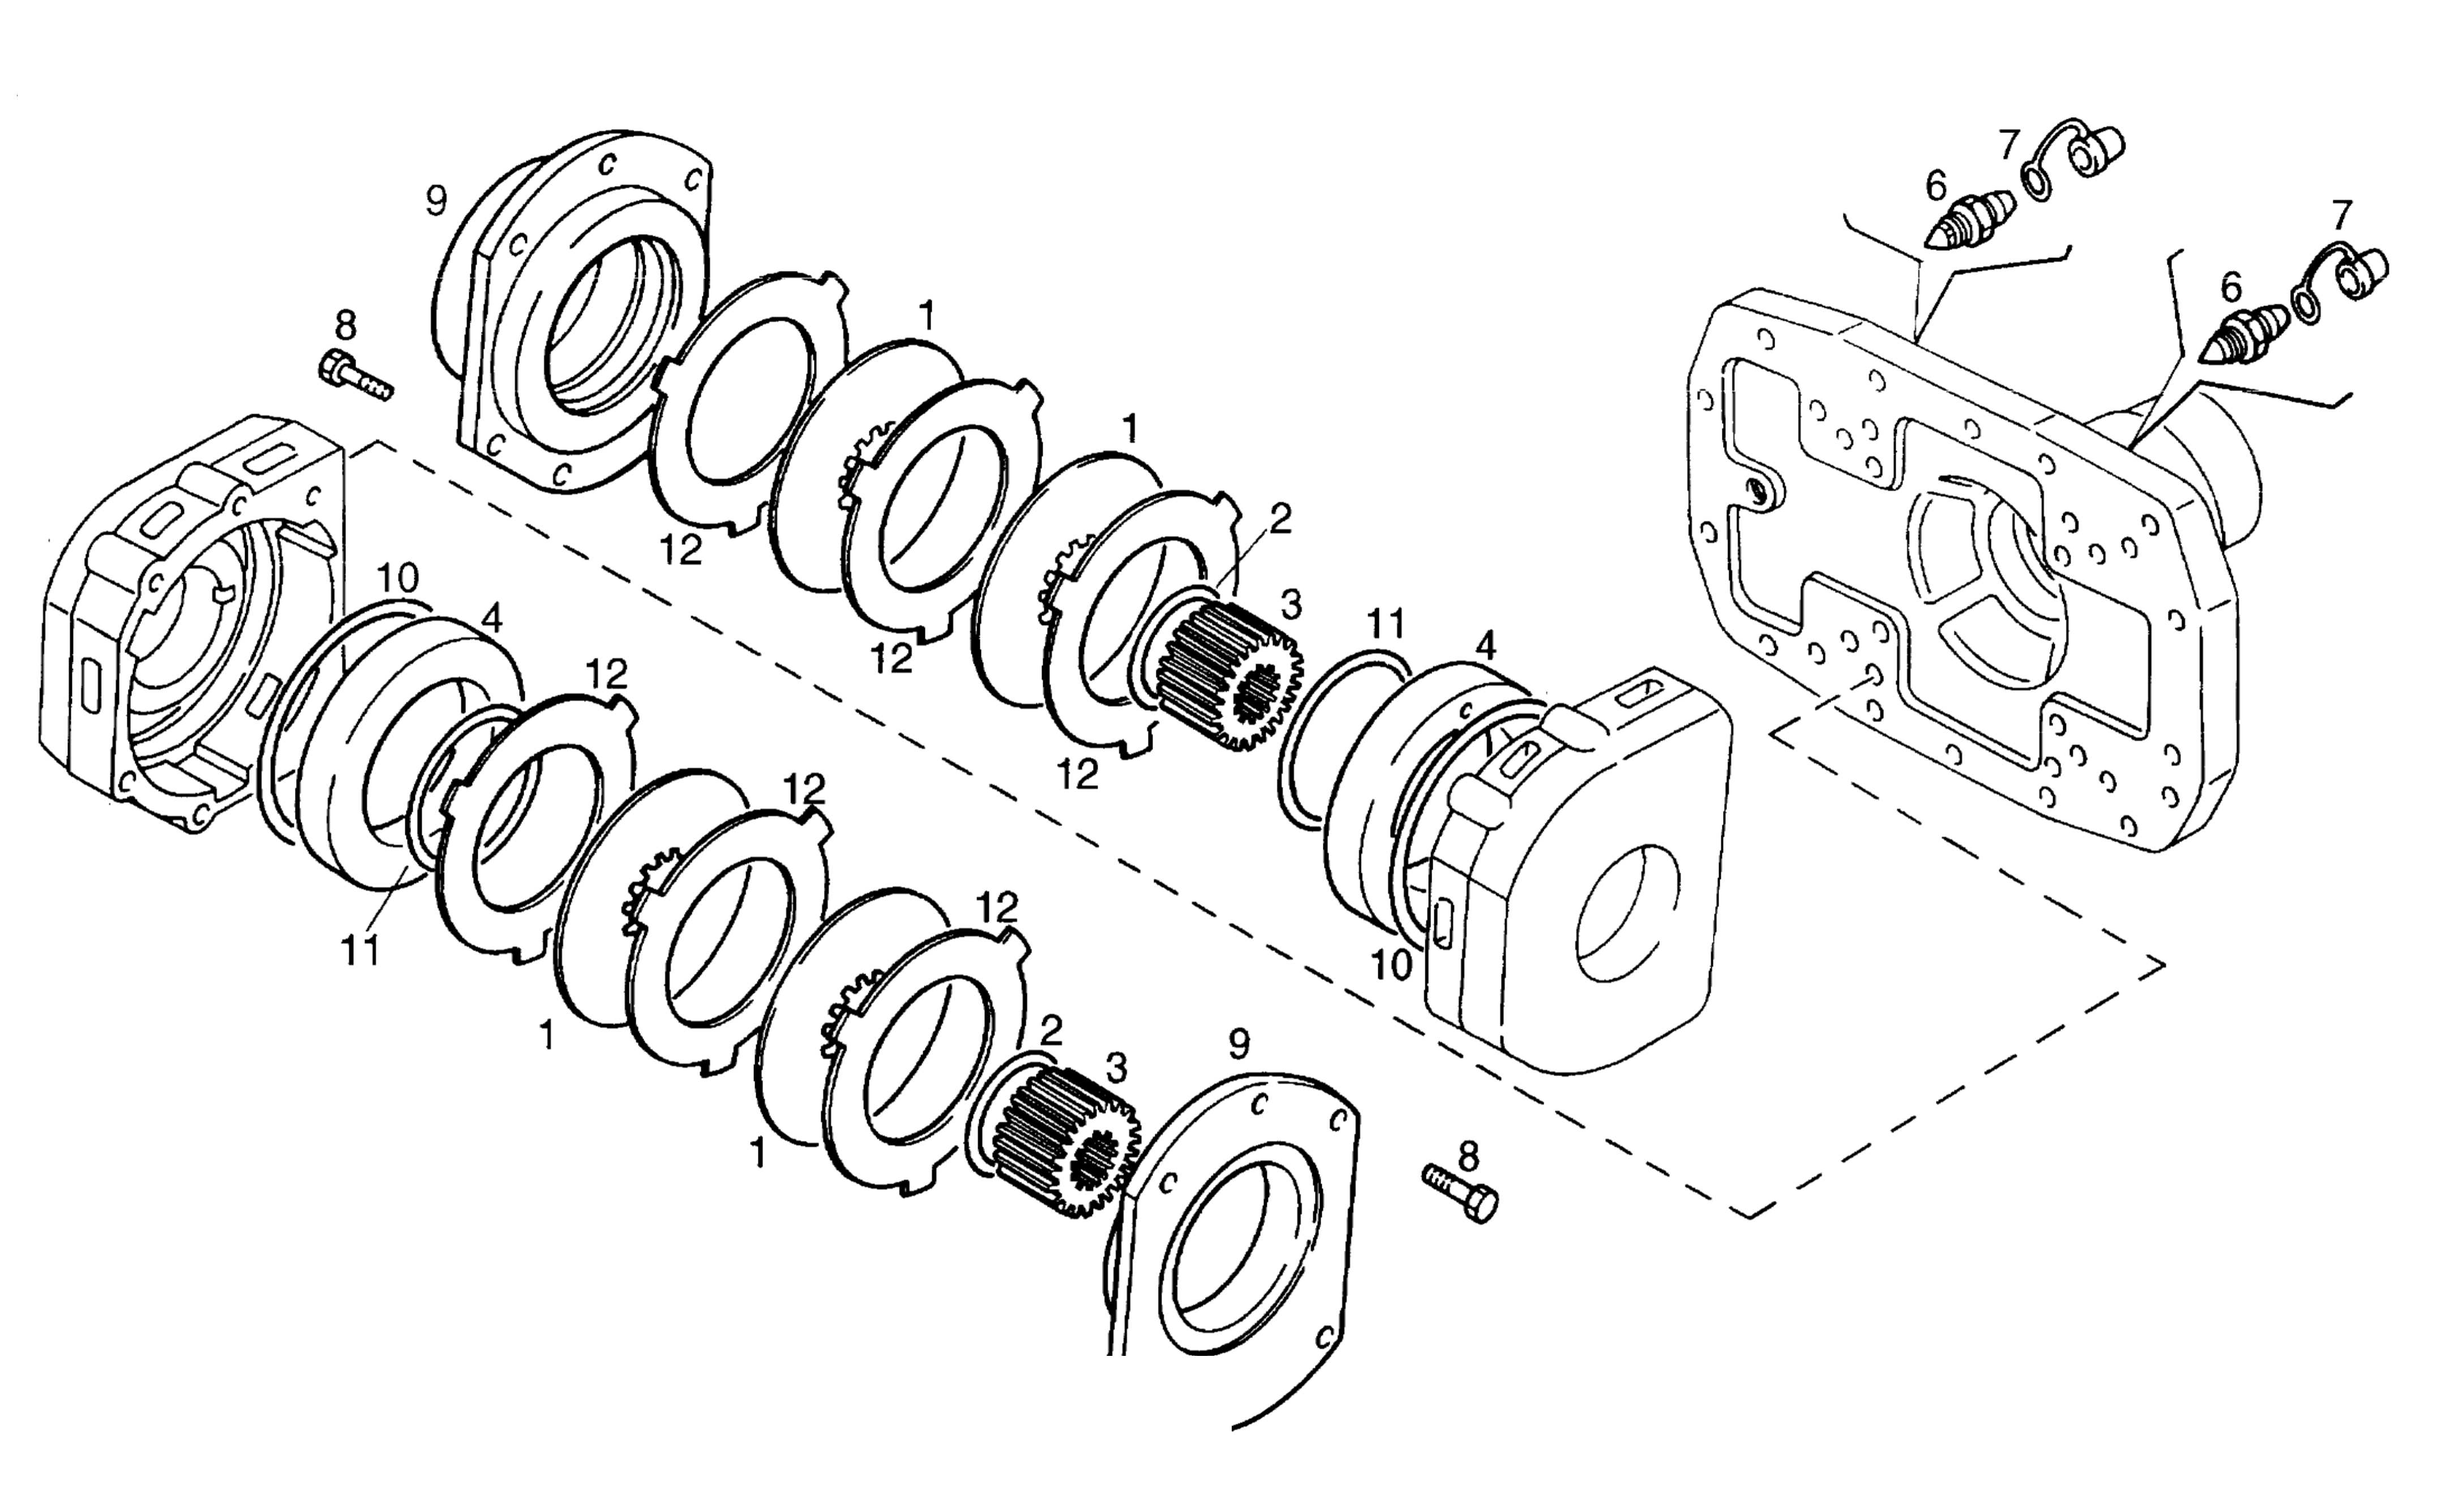 drawing for McCORMICK 1440429X1 - BOLT (figure 3)